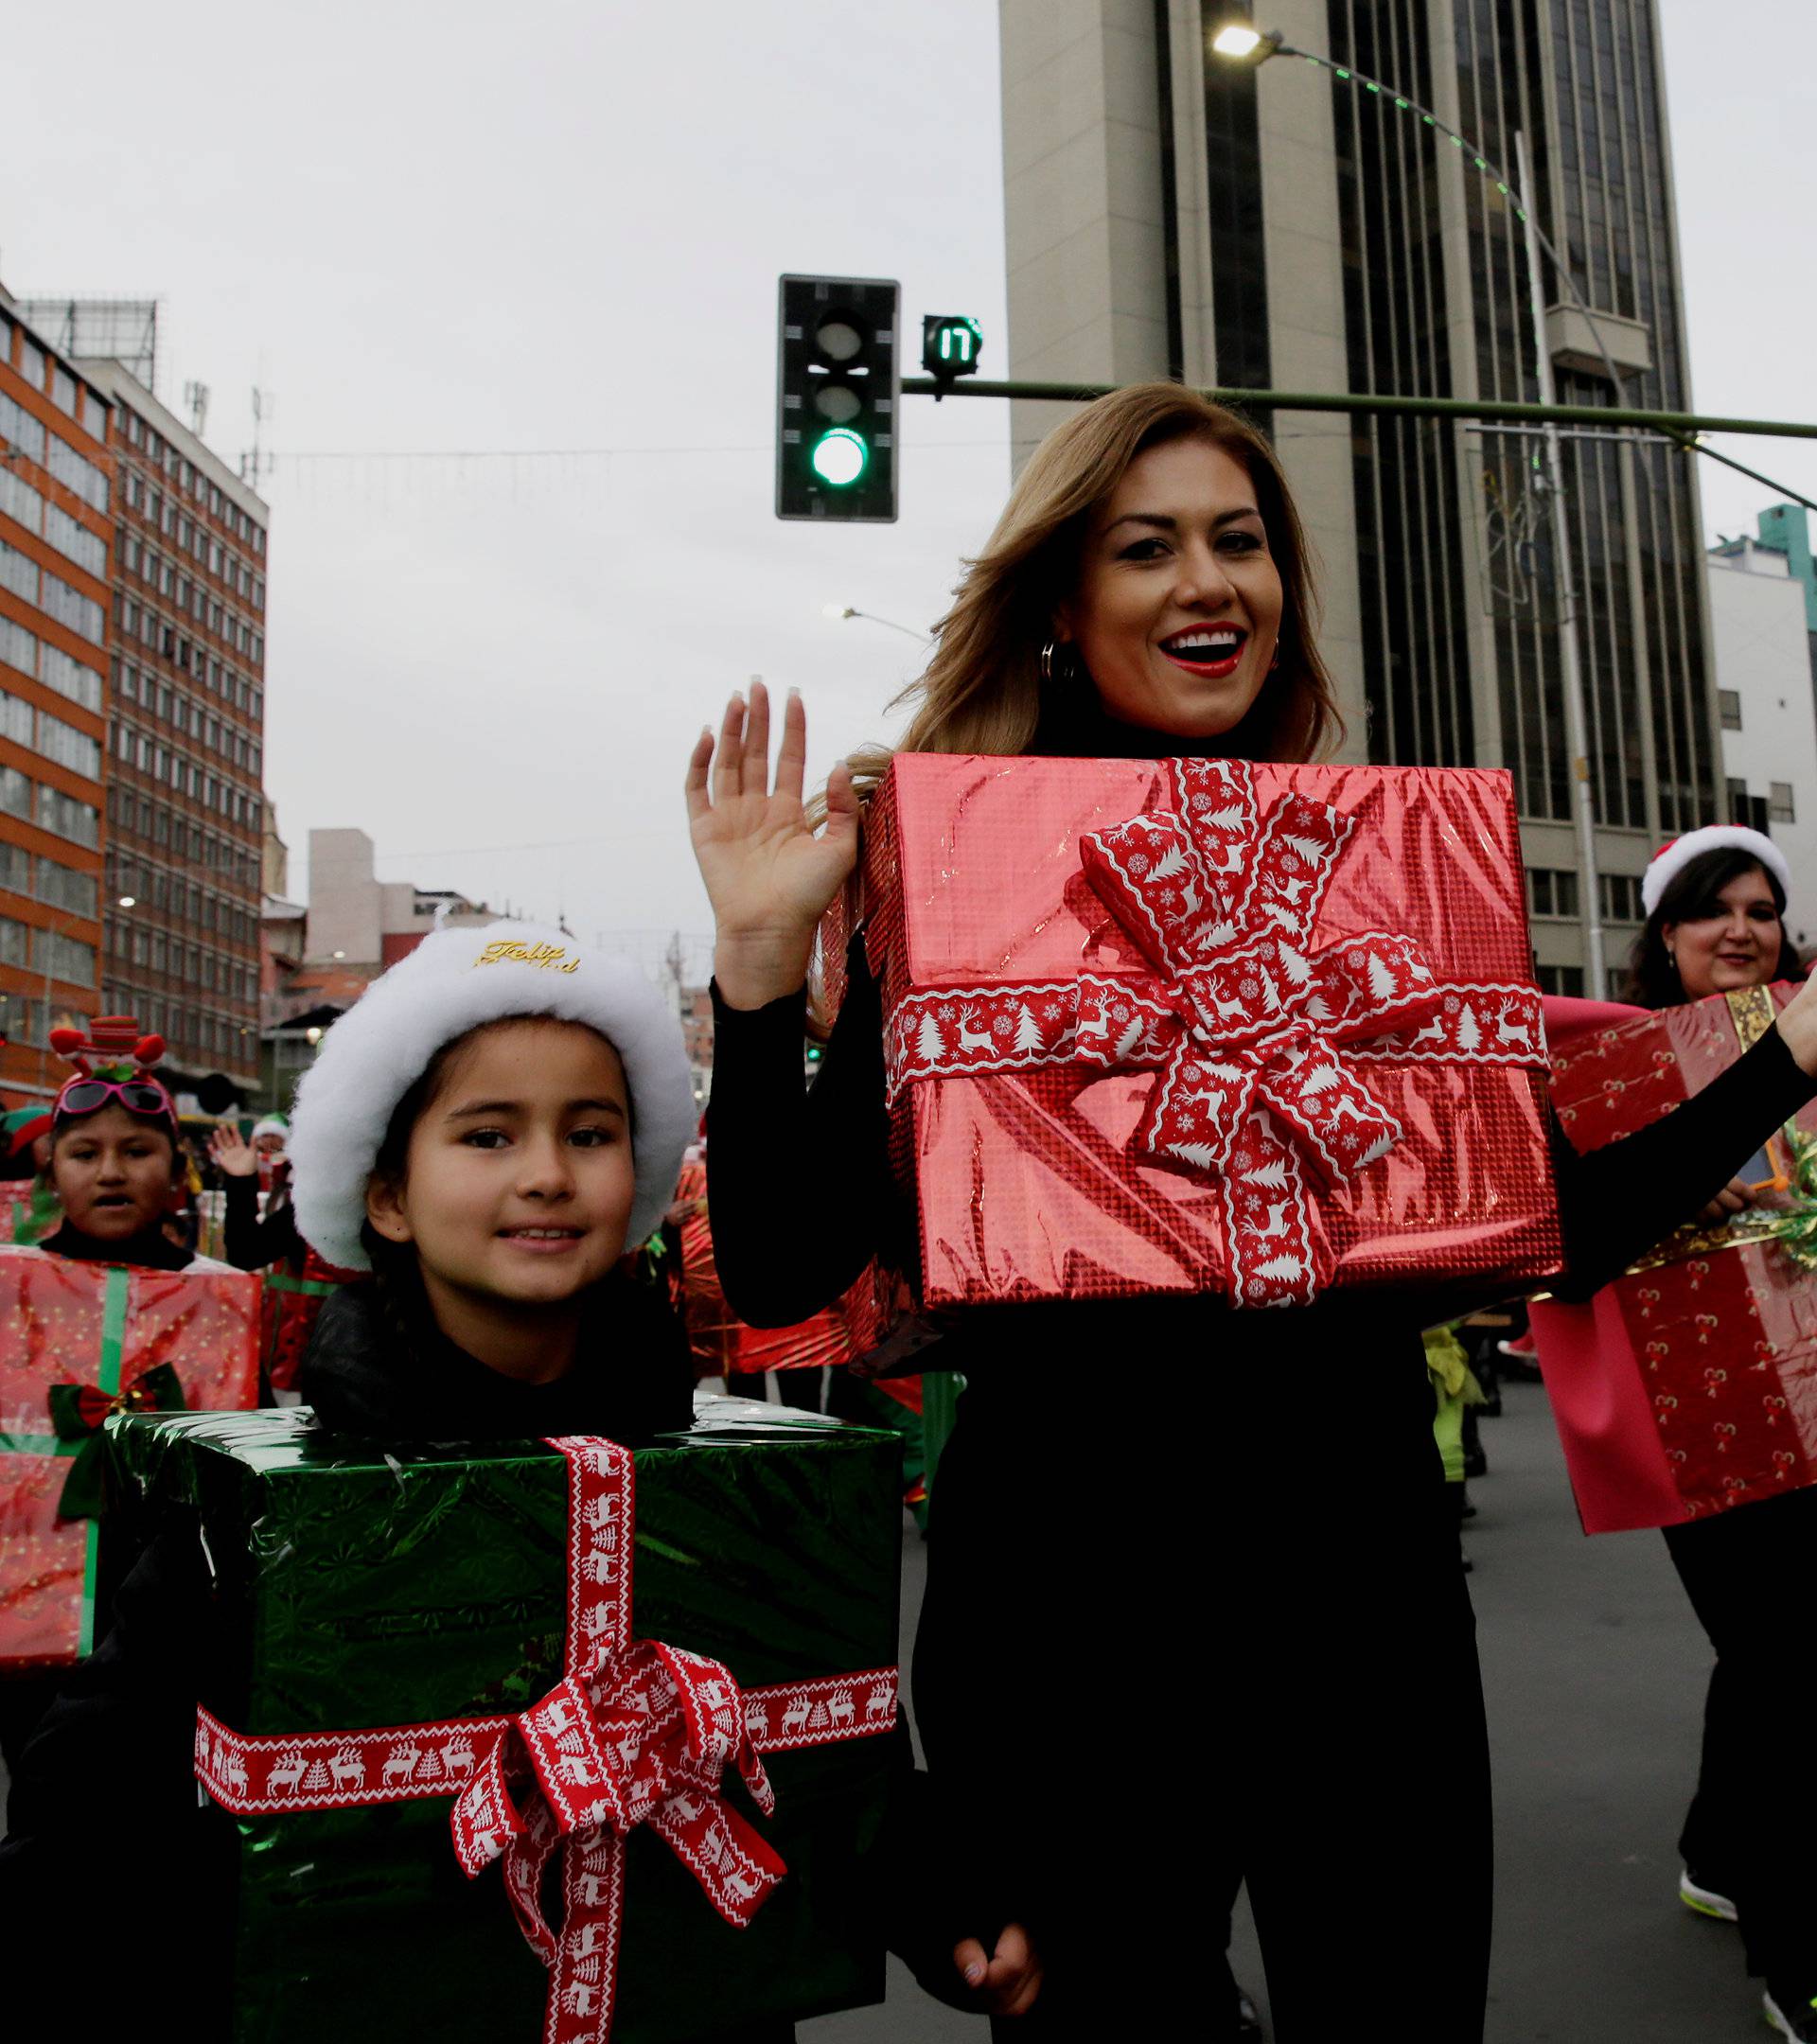 Residents participate in a Christmas parade in La Paz